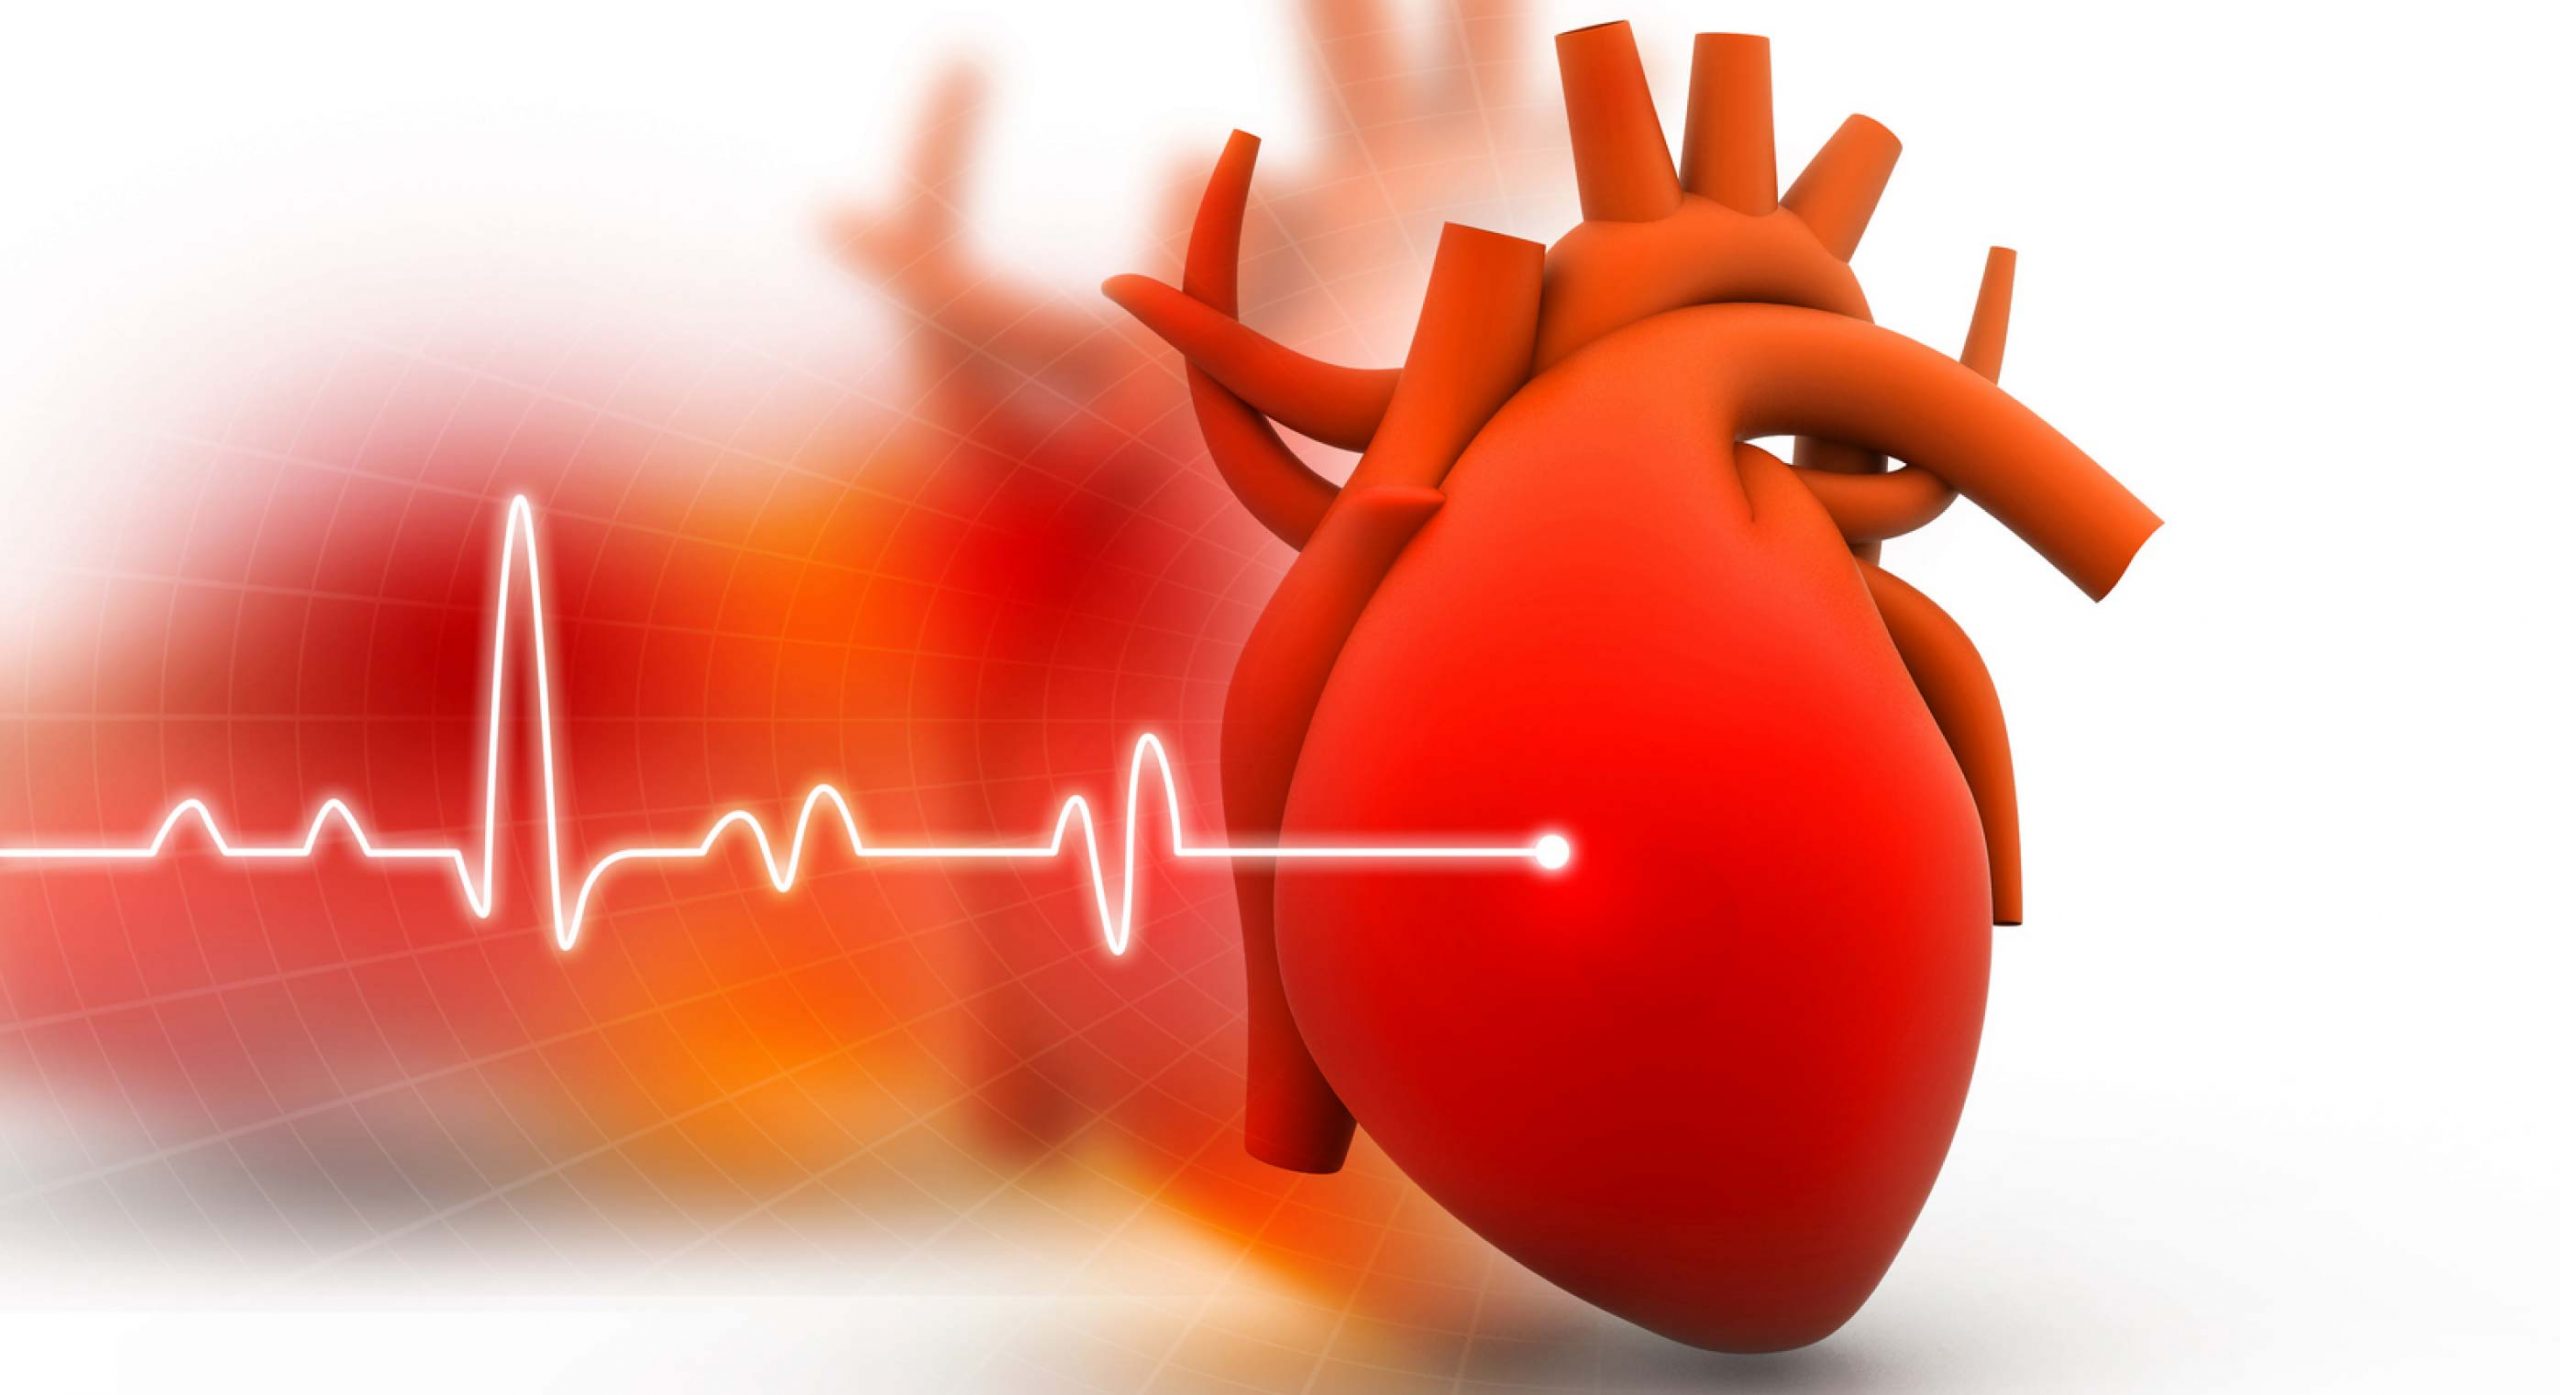 heart attacks occur and what is its treatment